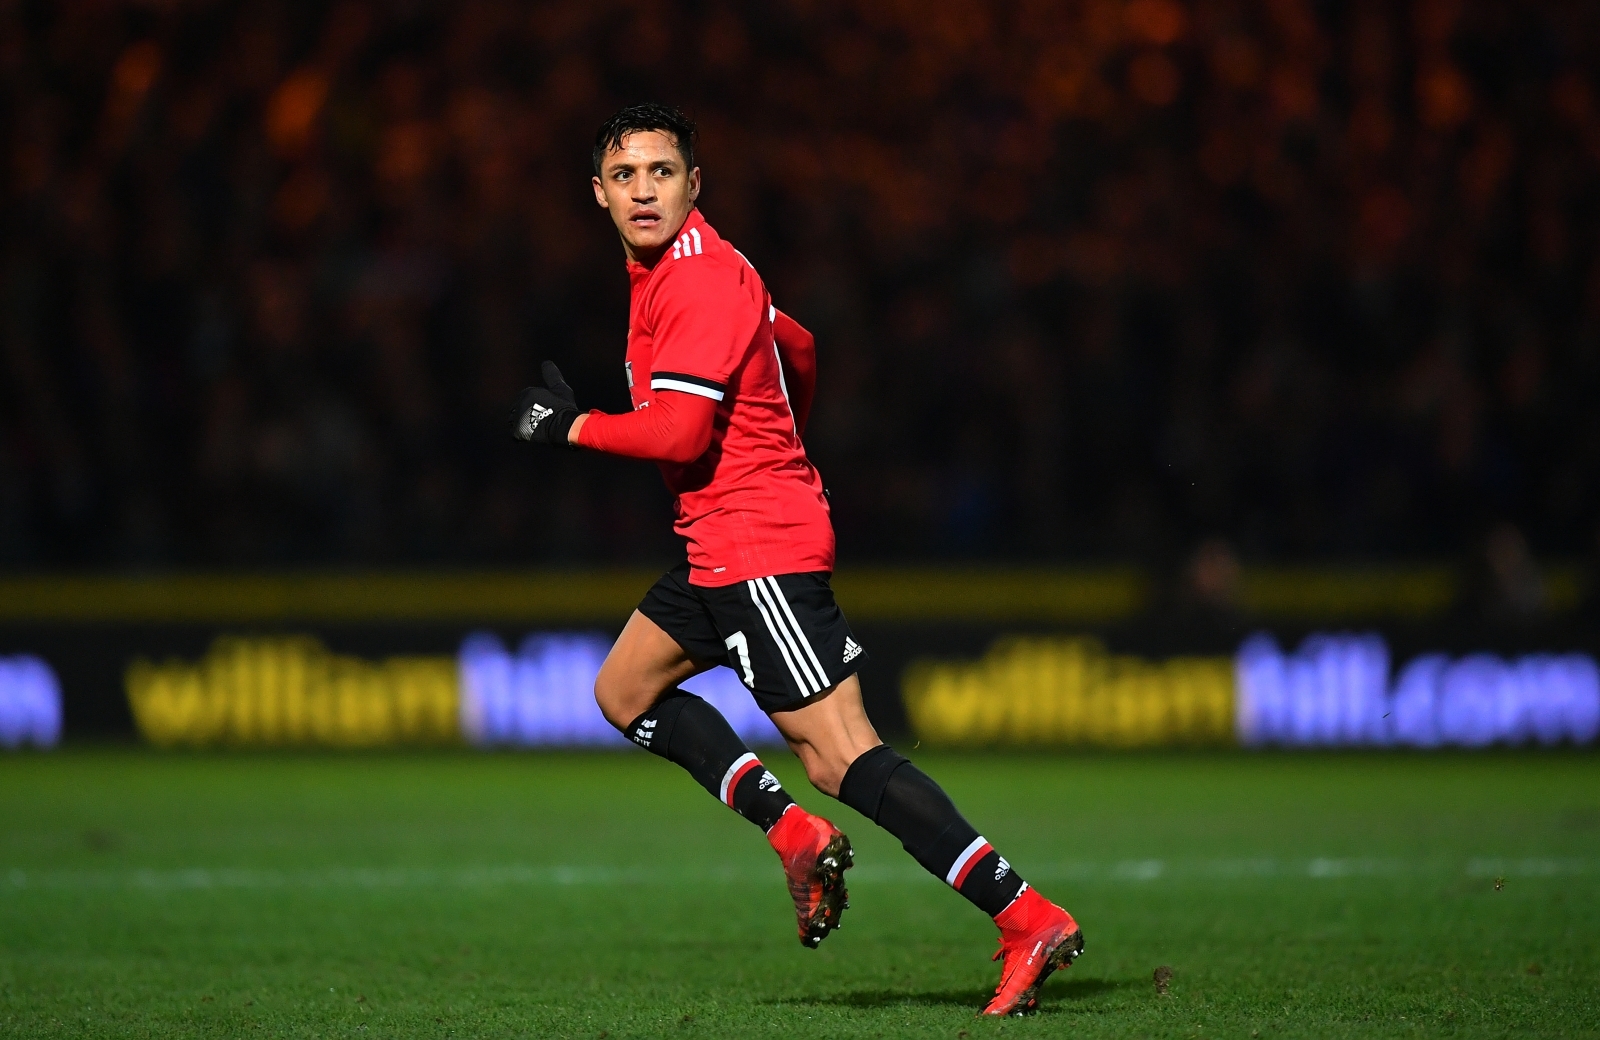 Hector Bellerin says Manchester United forward Alexis Sanchez's demands 'can be too much